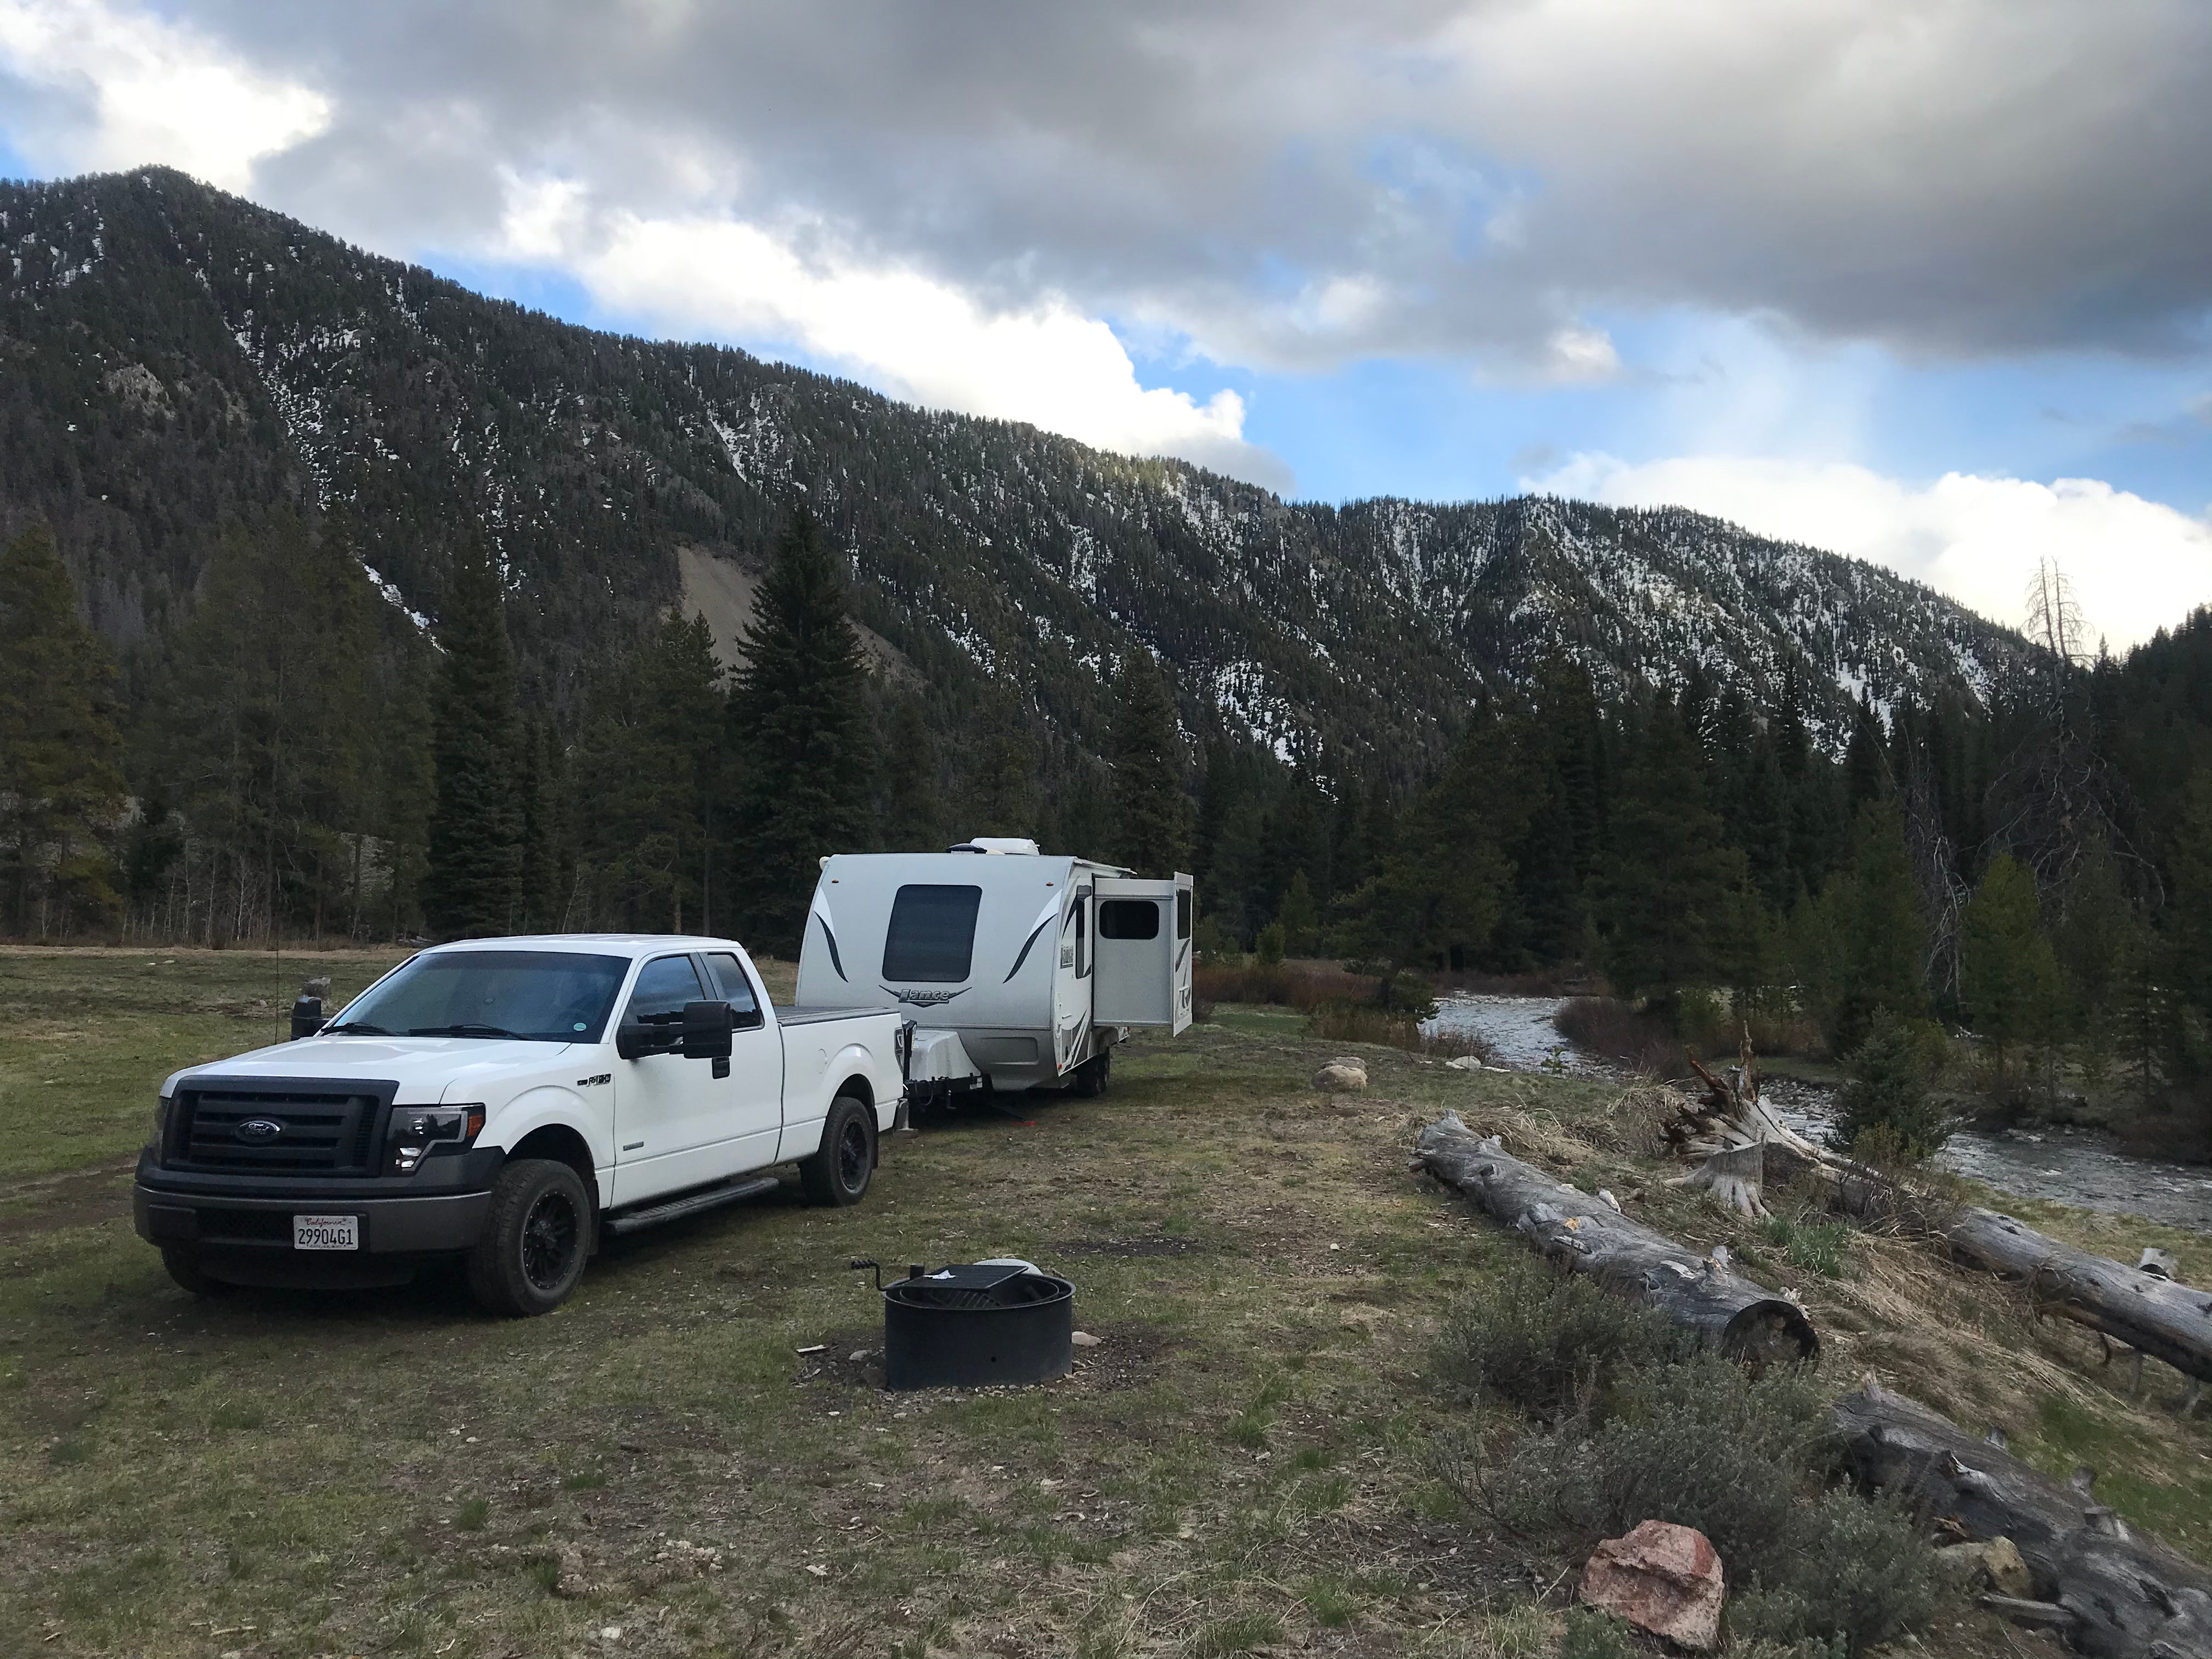 Camper submitted image from Cougar Dispersed Camping Area - 3